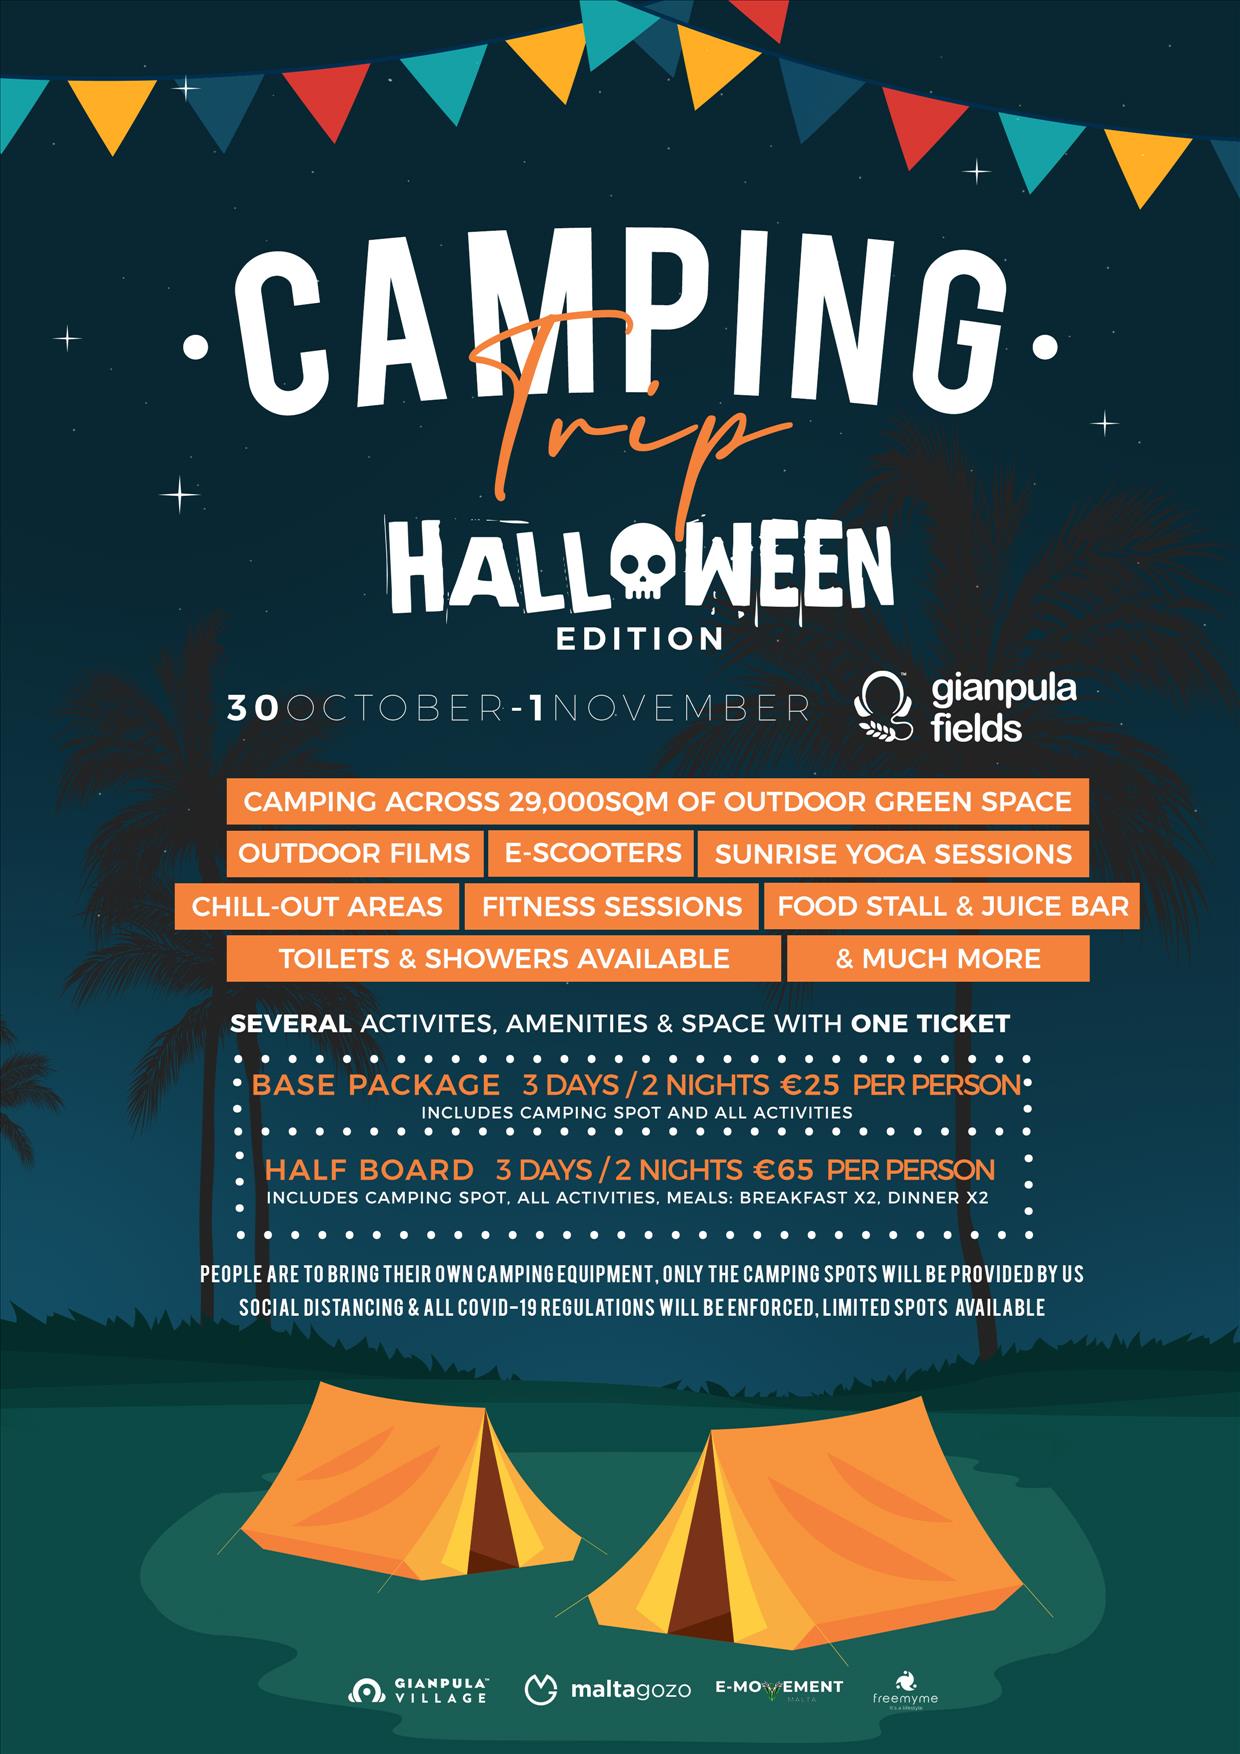 Camping Trip Halloween Edition poster